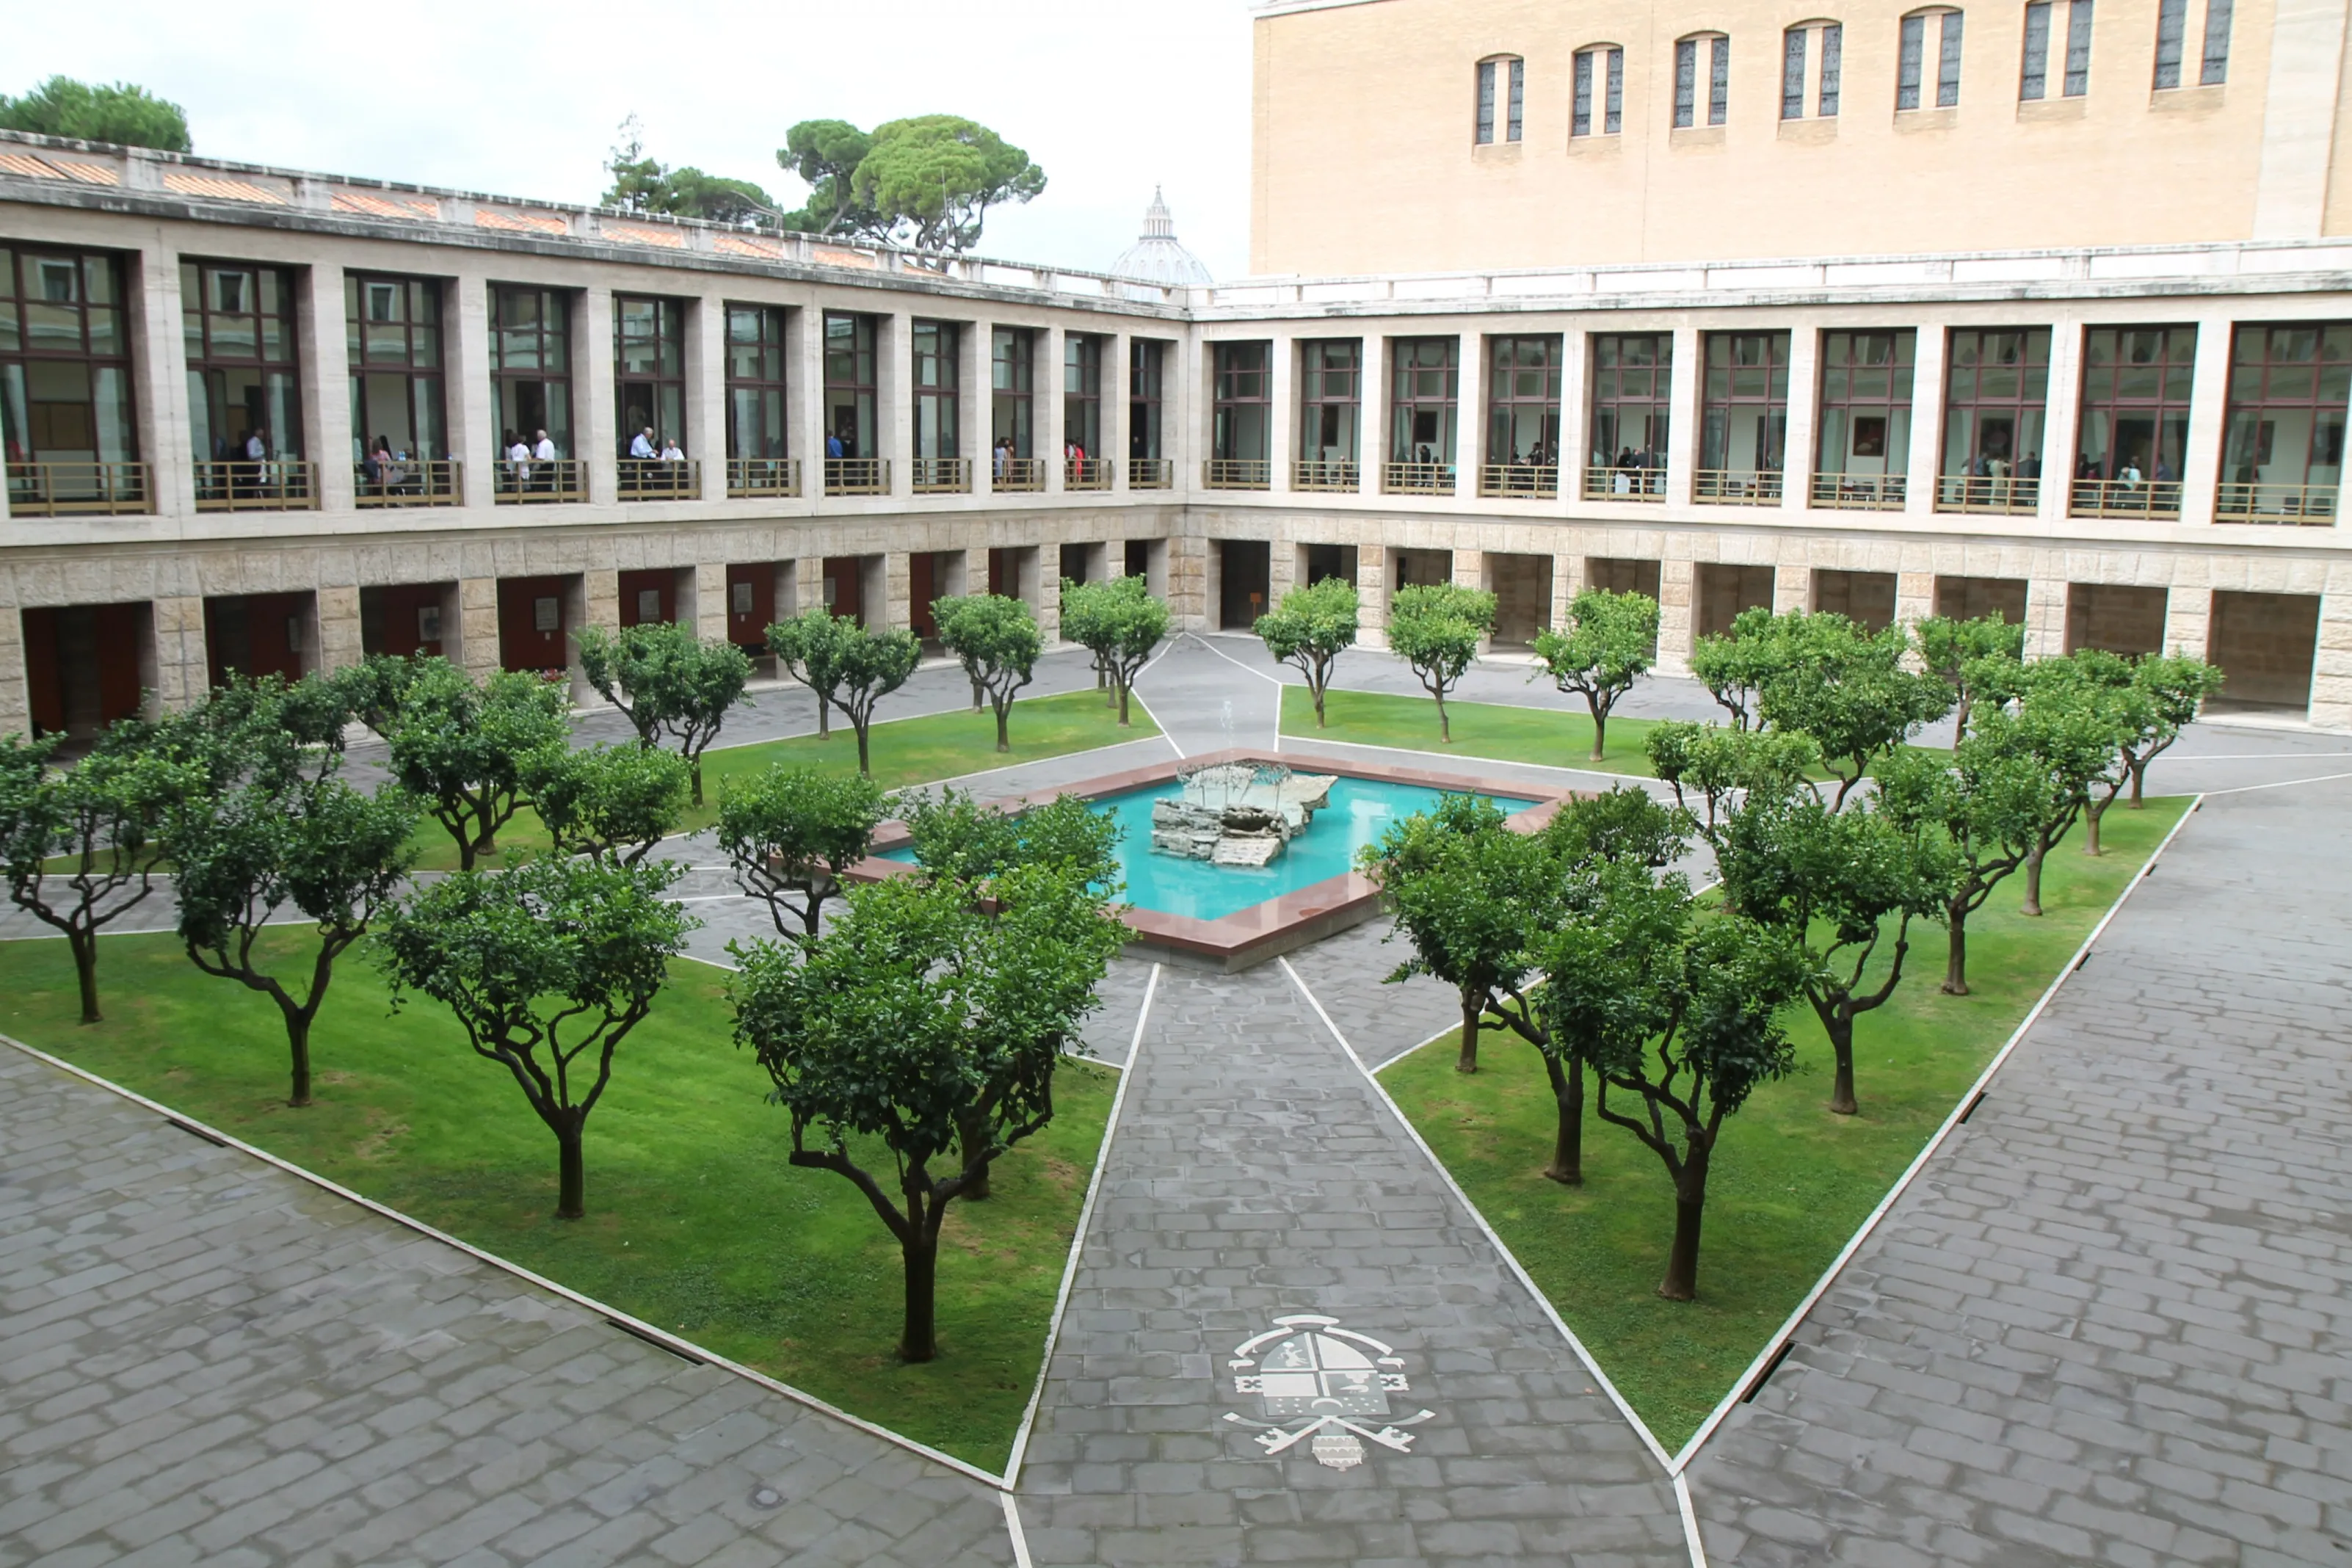 The Pontifical North American College is a major seminary in Rome that educates seminarians from U.S. diocese and elsewhere.?w=200&h=150